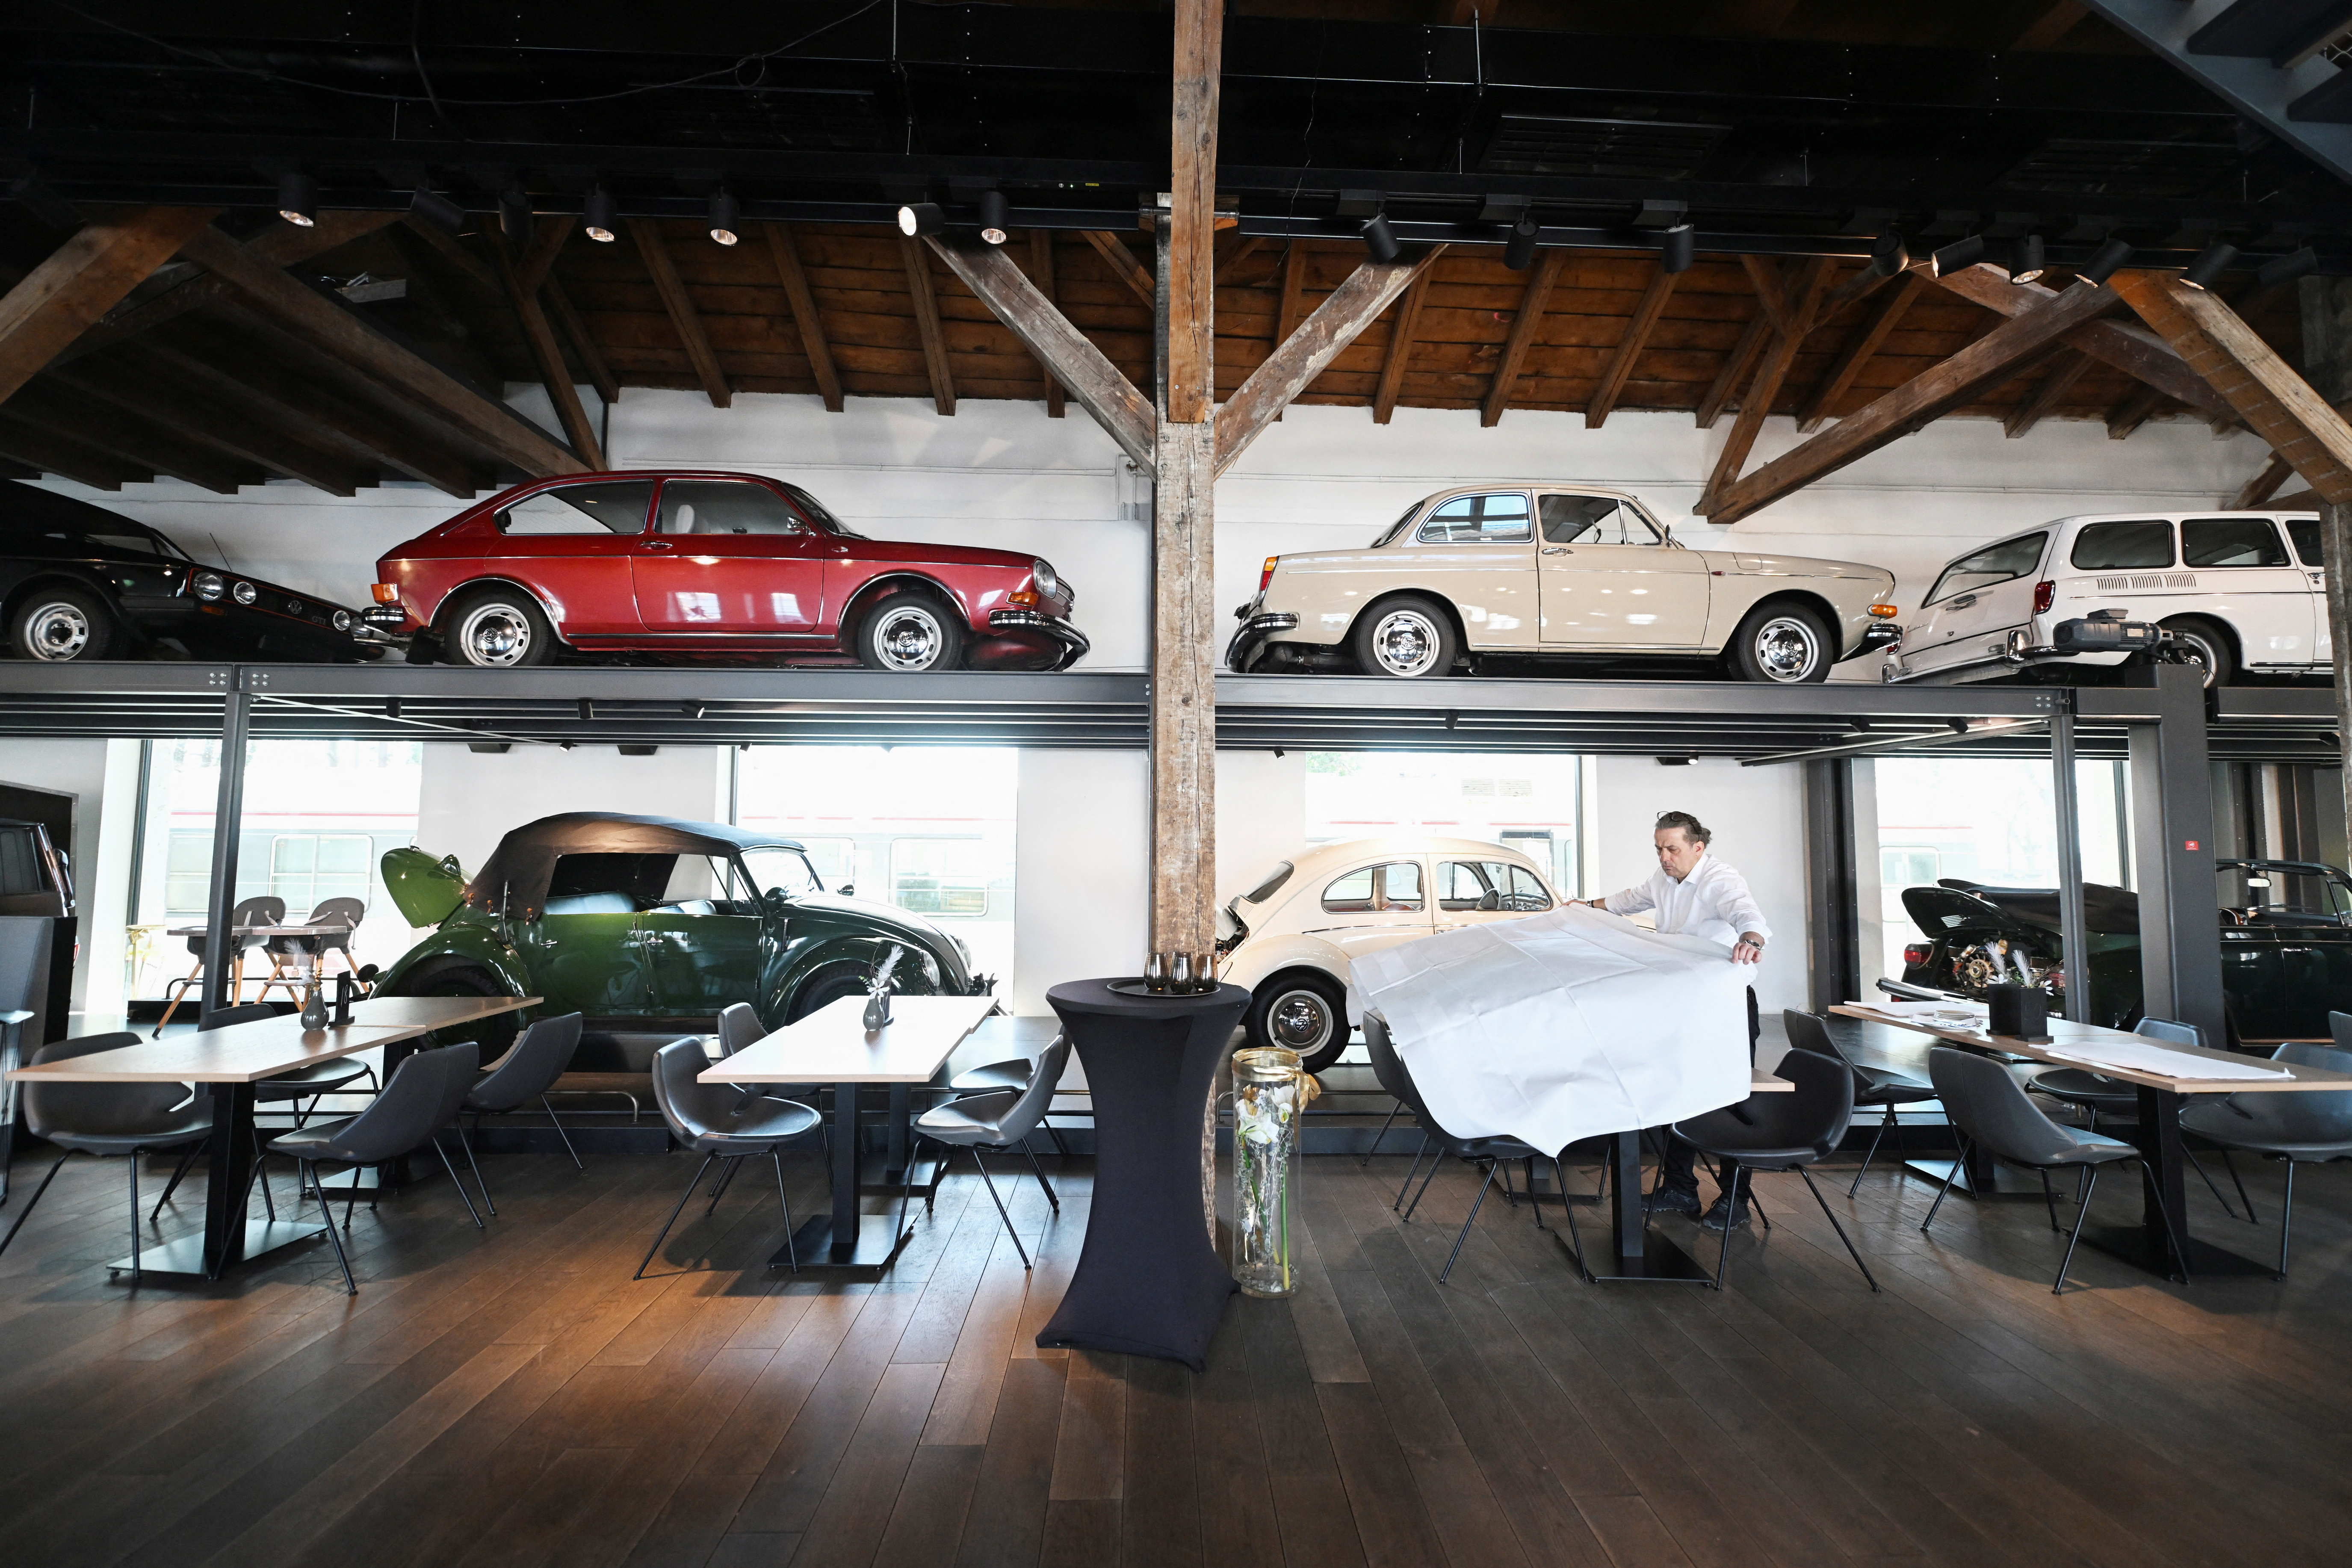 Collection cars draw increasing intrerest from funds as green transition creates cult objects